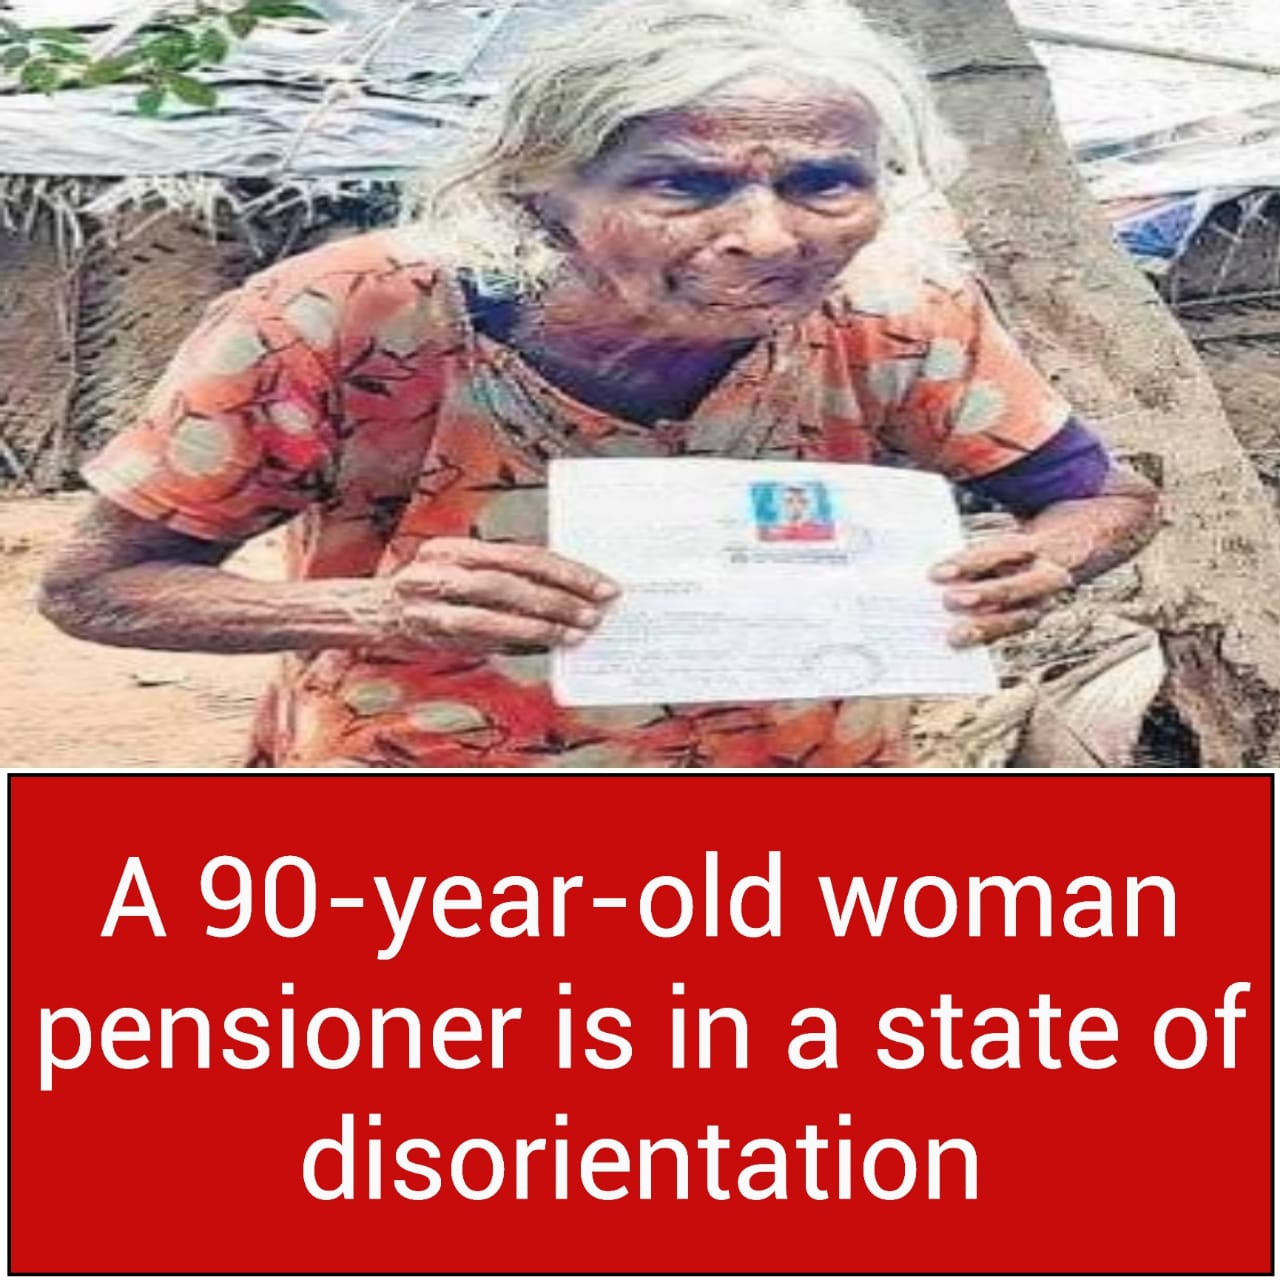 A 90-year-old woman pensioner is in a state of disorientation